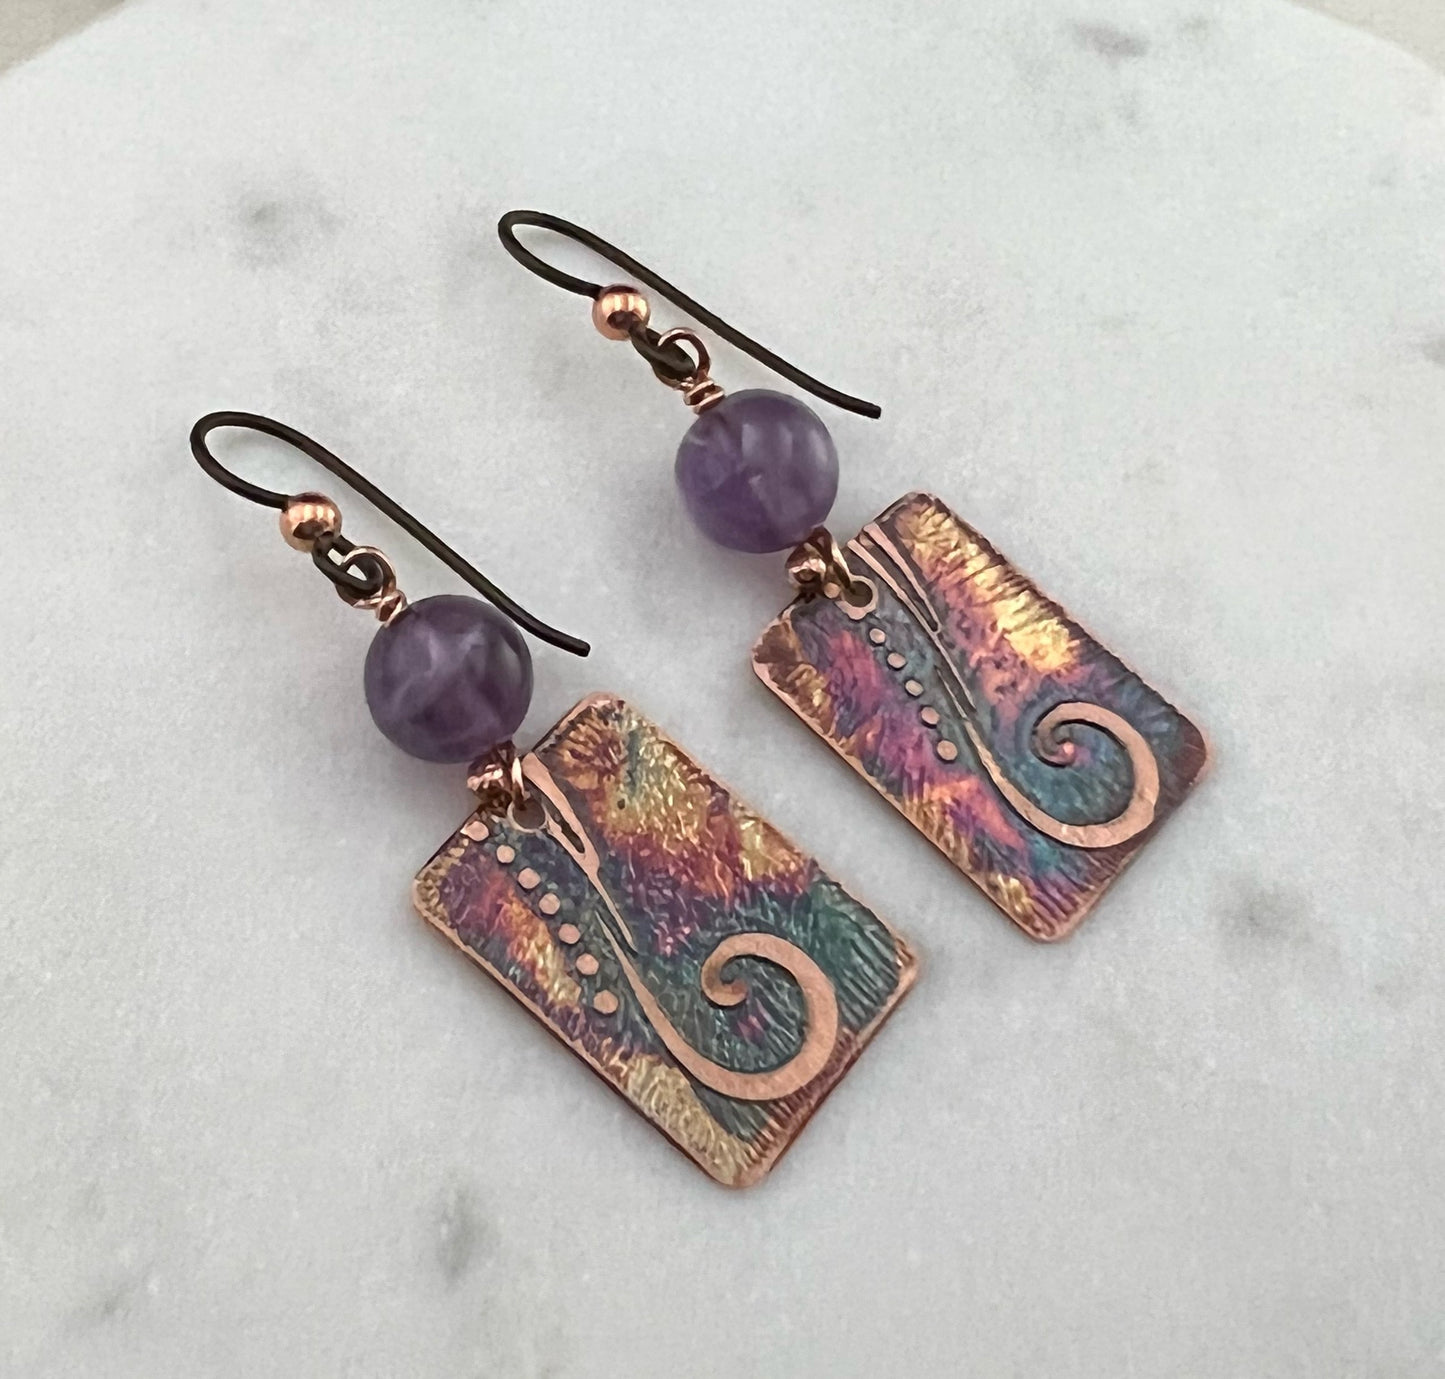 Acid  etched copper earrings with amethyst gemstones